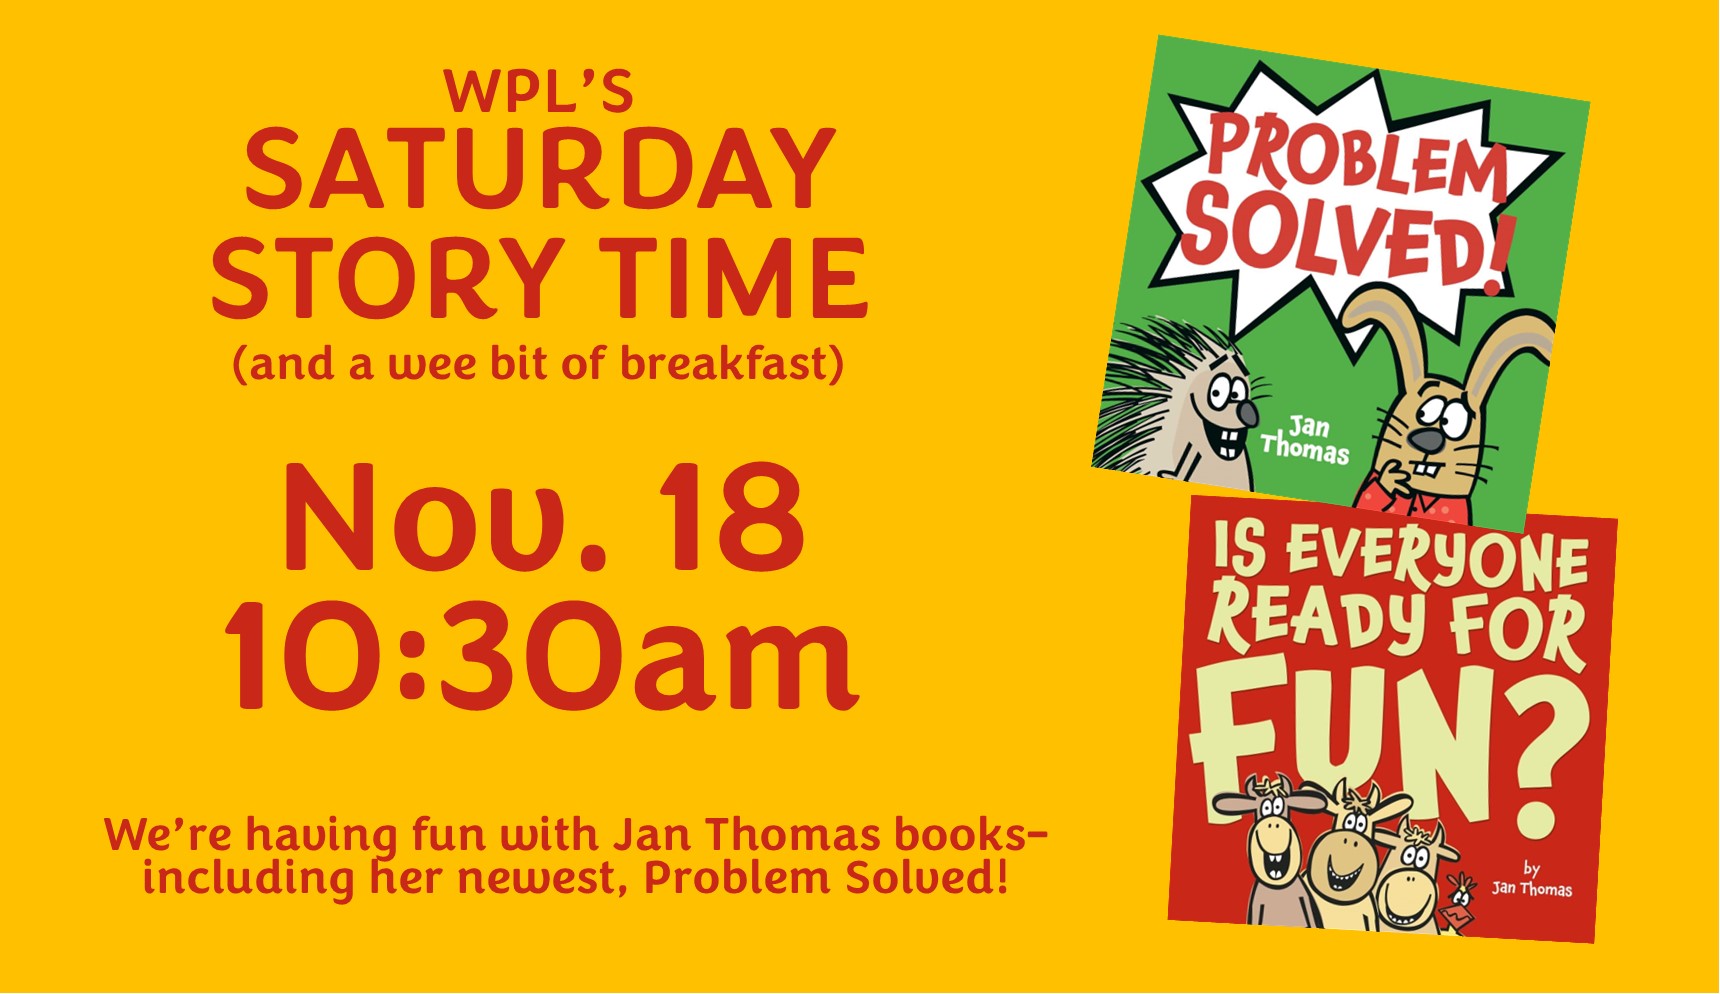 Pictures of two books by Jan Thomas- the book, Problem Solved, and the book Is Everyone Ready for Fun